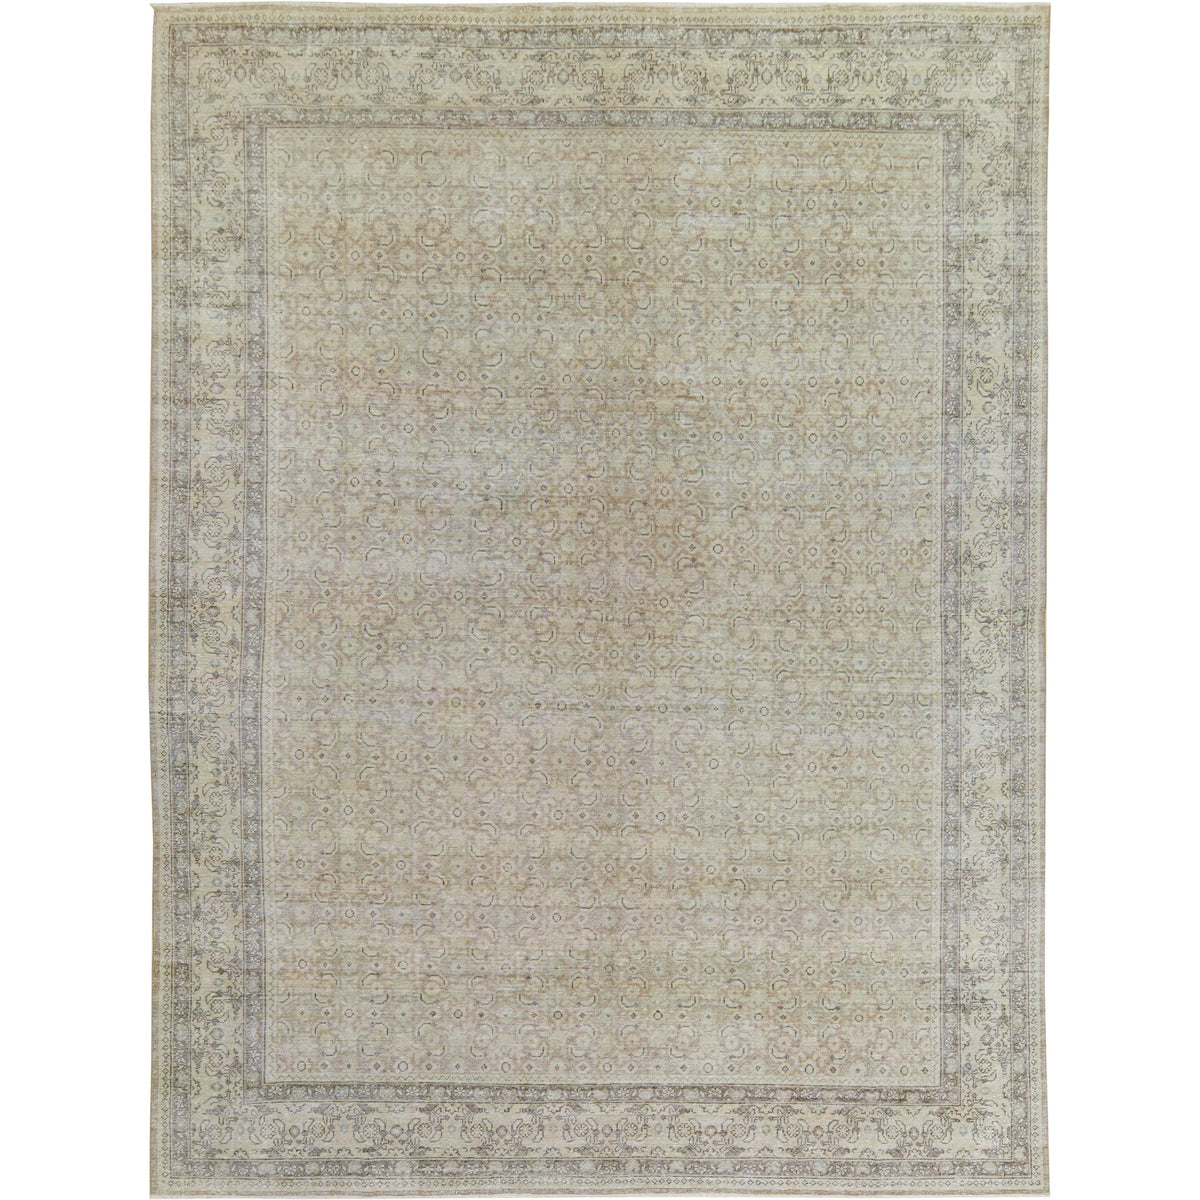 Rhonda - Vintage Turkish Rug, Elevating Your Floors with Timeless Beauty | Kuden Rugs